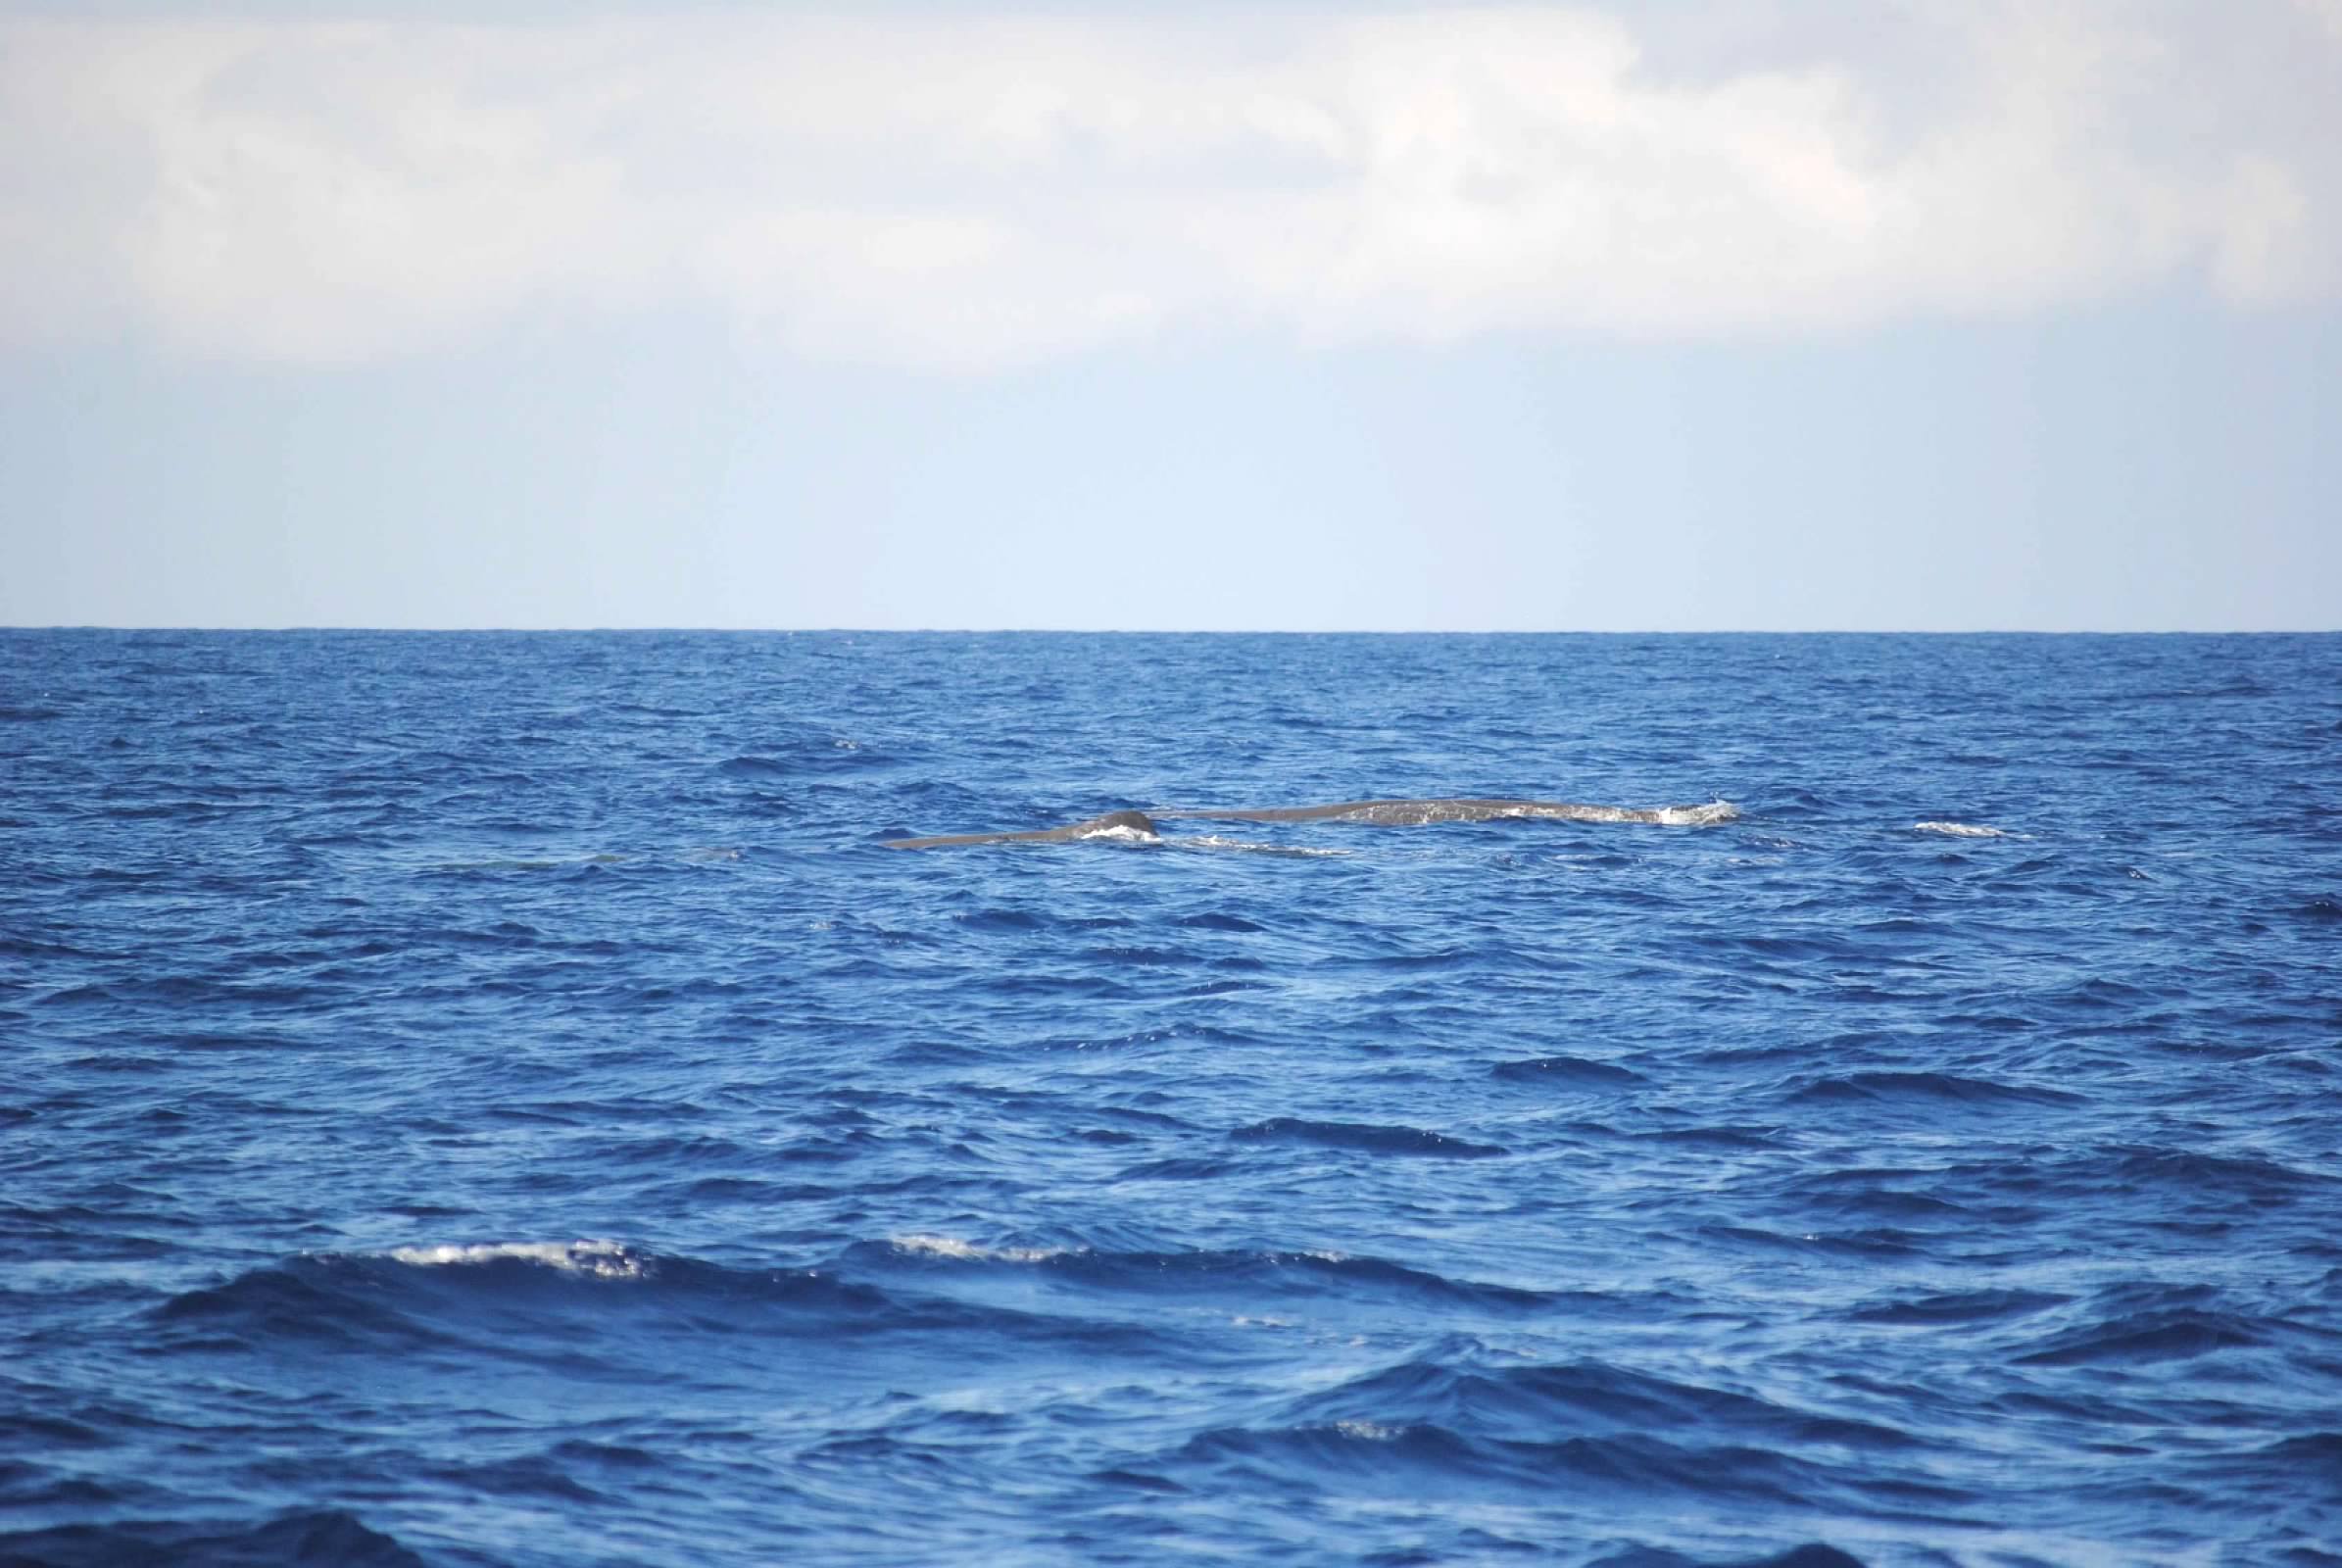 Pod of whales off Sao Miguel Island, Azores